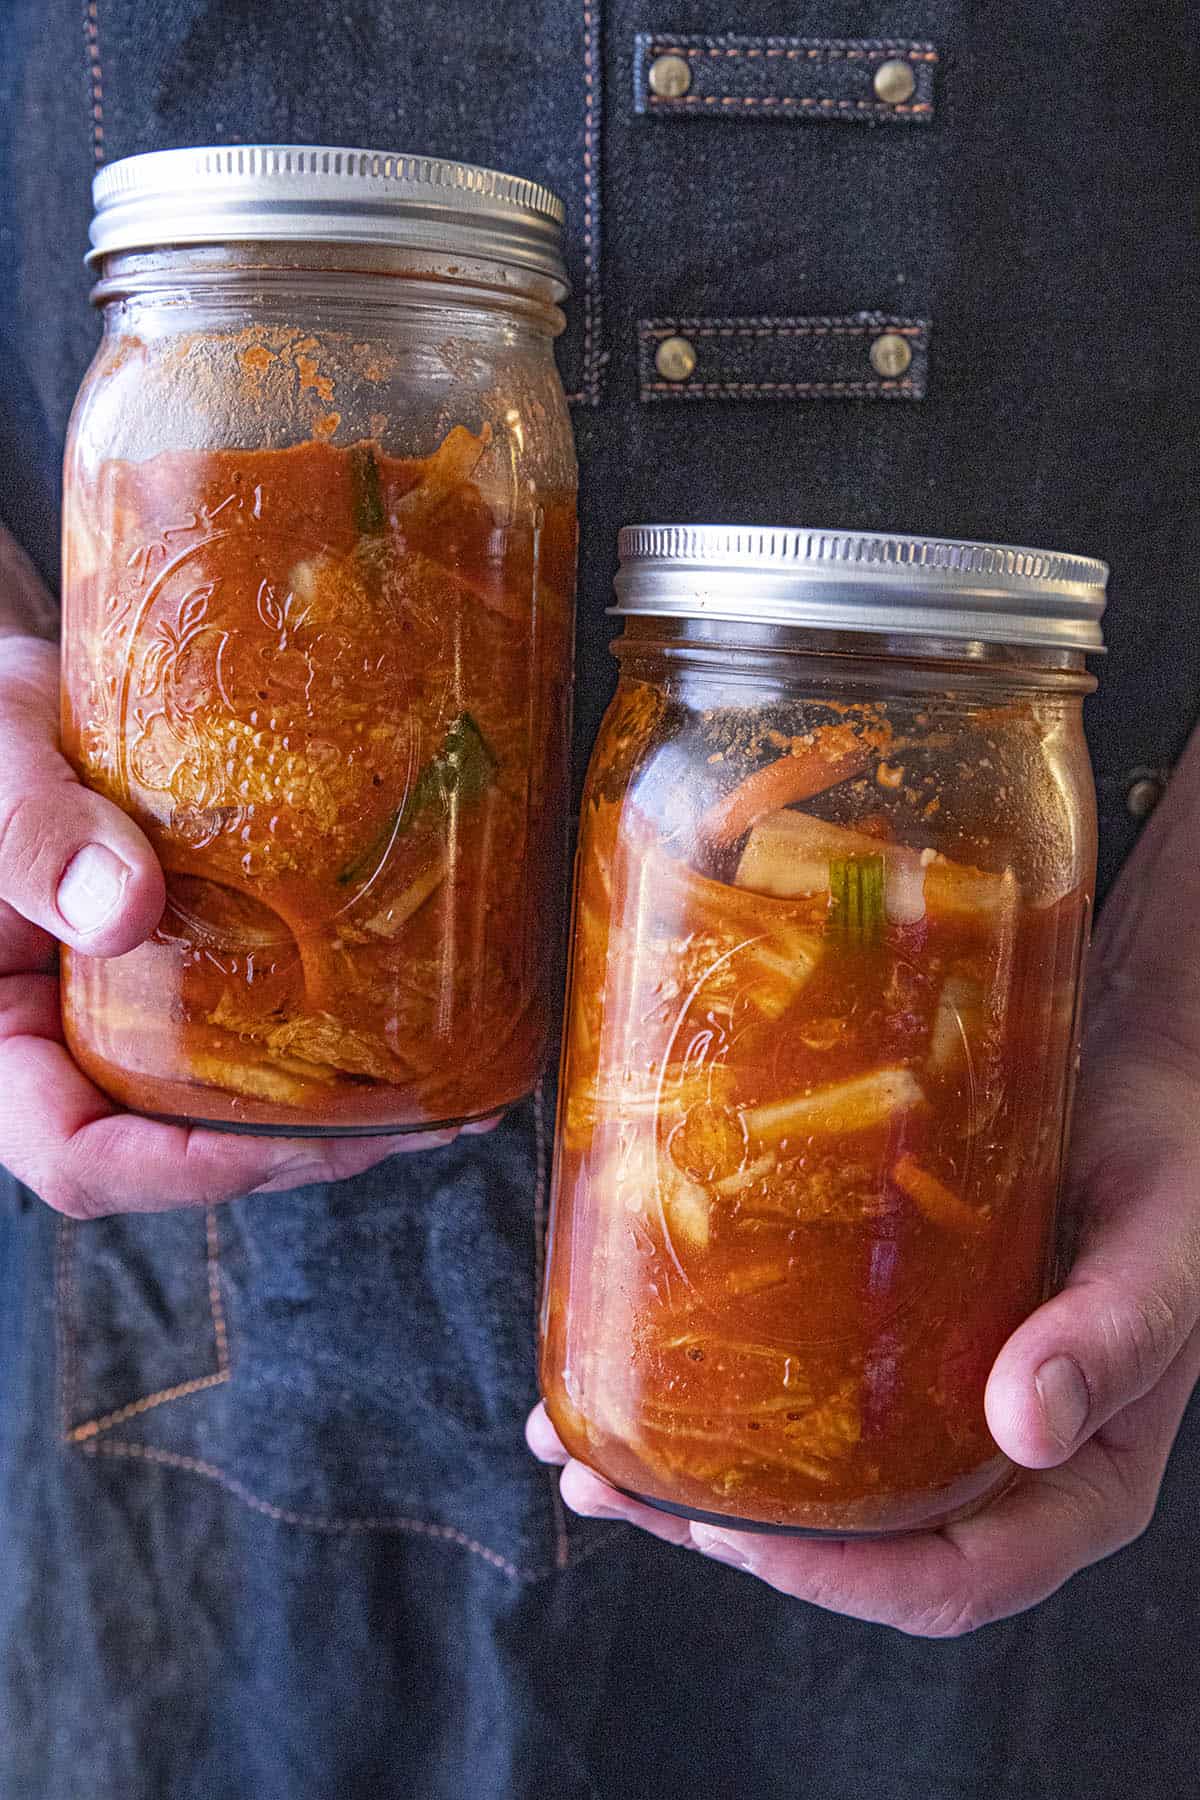 Mike holding 2 jars of spicy homemade kimchi